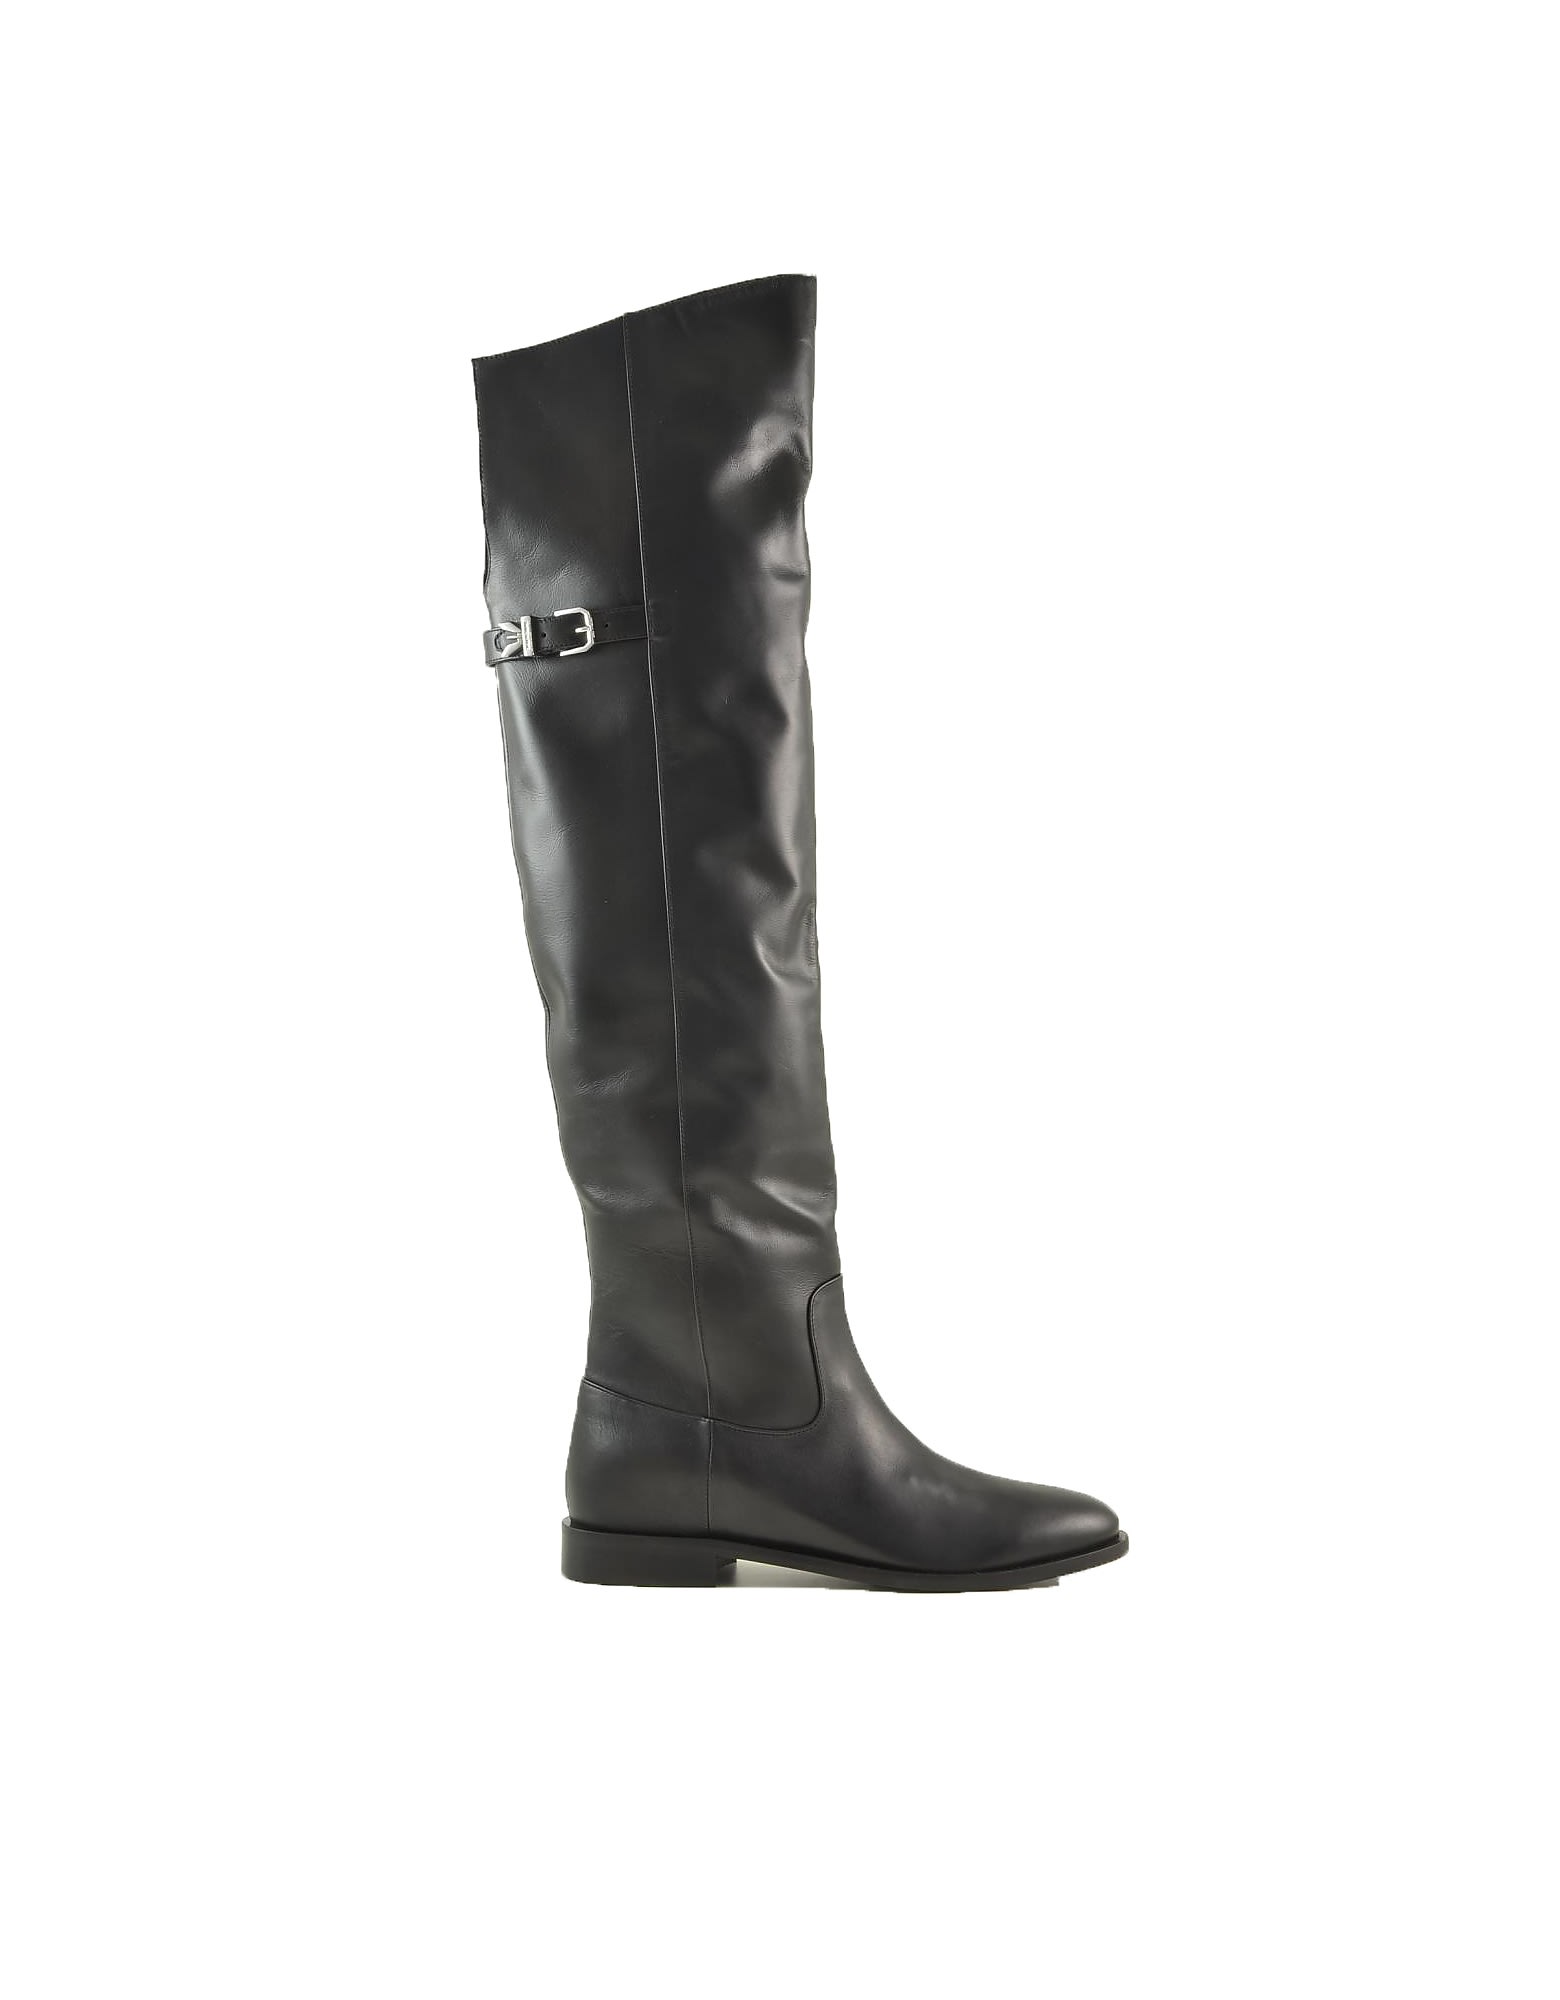 Patrizia Pepe Black Leather To-the-knee Boots